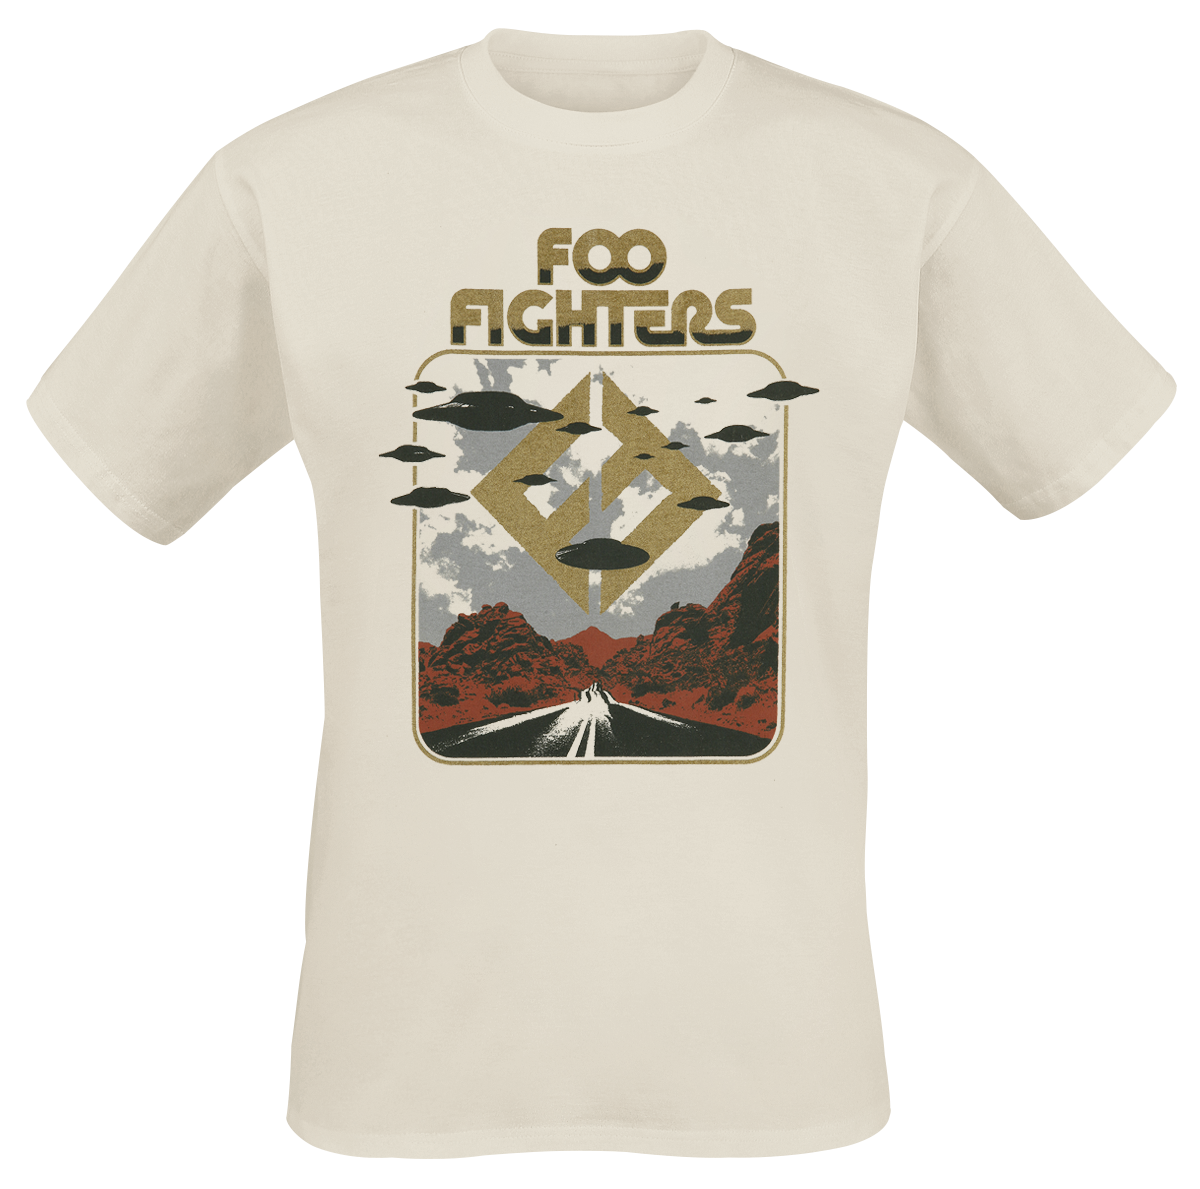 Foo Fighters - Roswell - T-Shirt - beige image